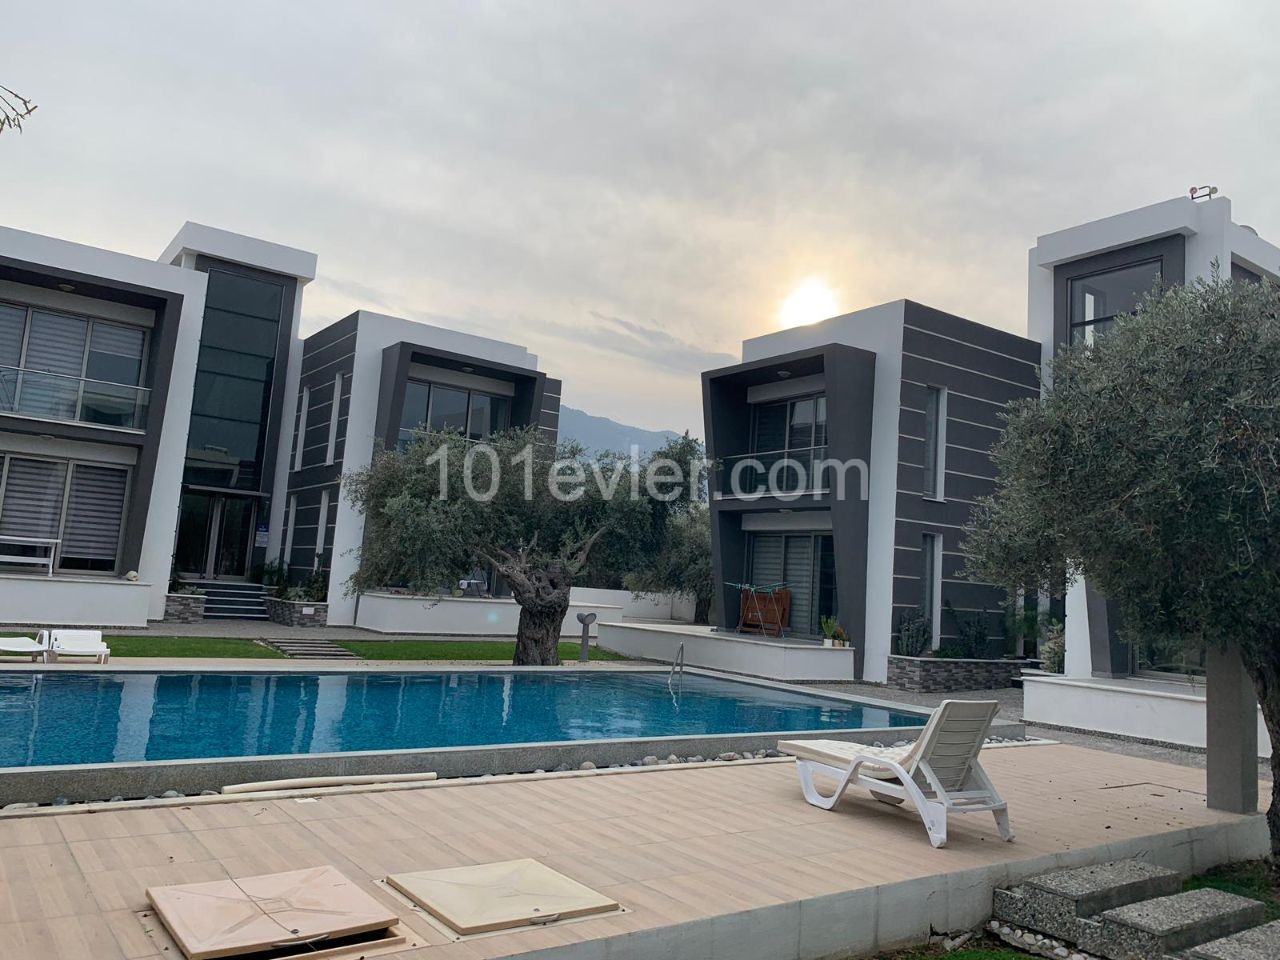 2+1 FURNISHED RESIDENCE WITH A SHARED POOL ON SITE IN OZANKOY ** 